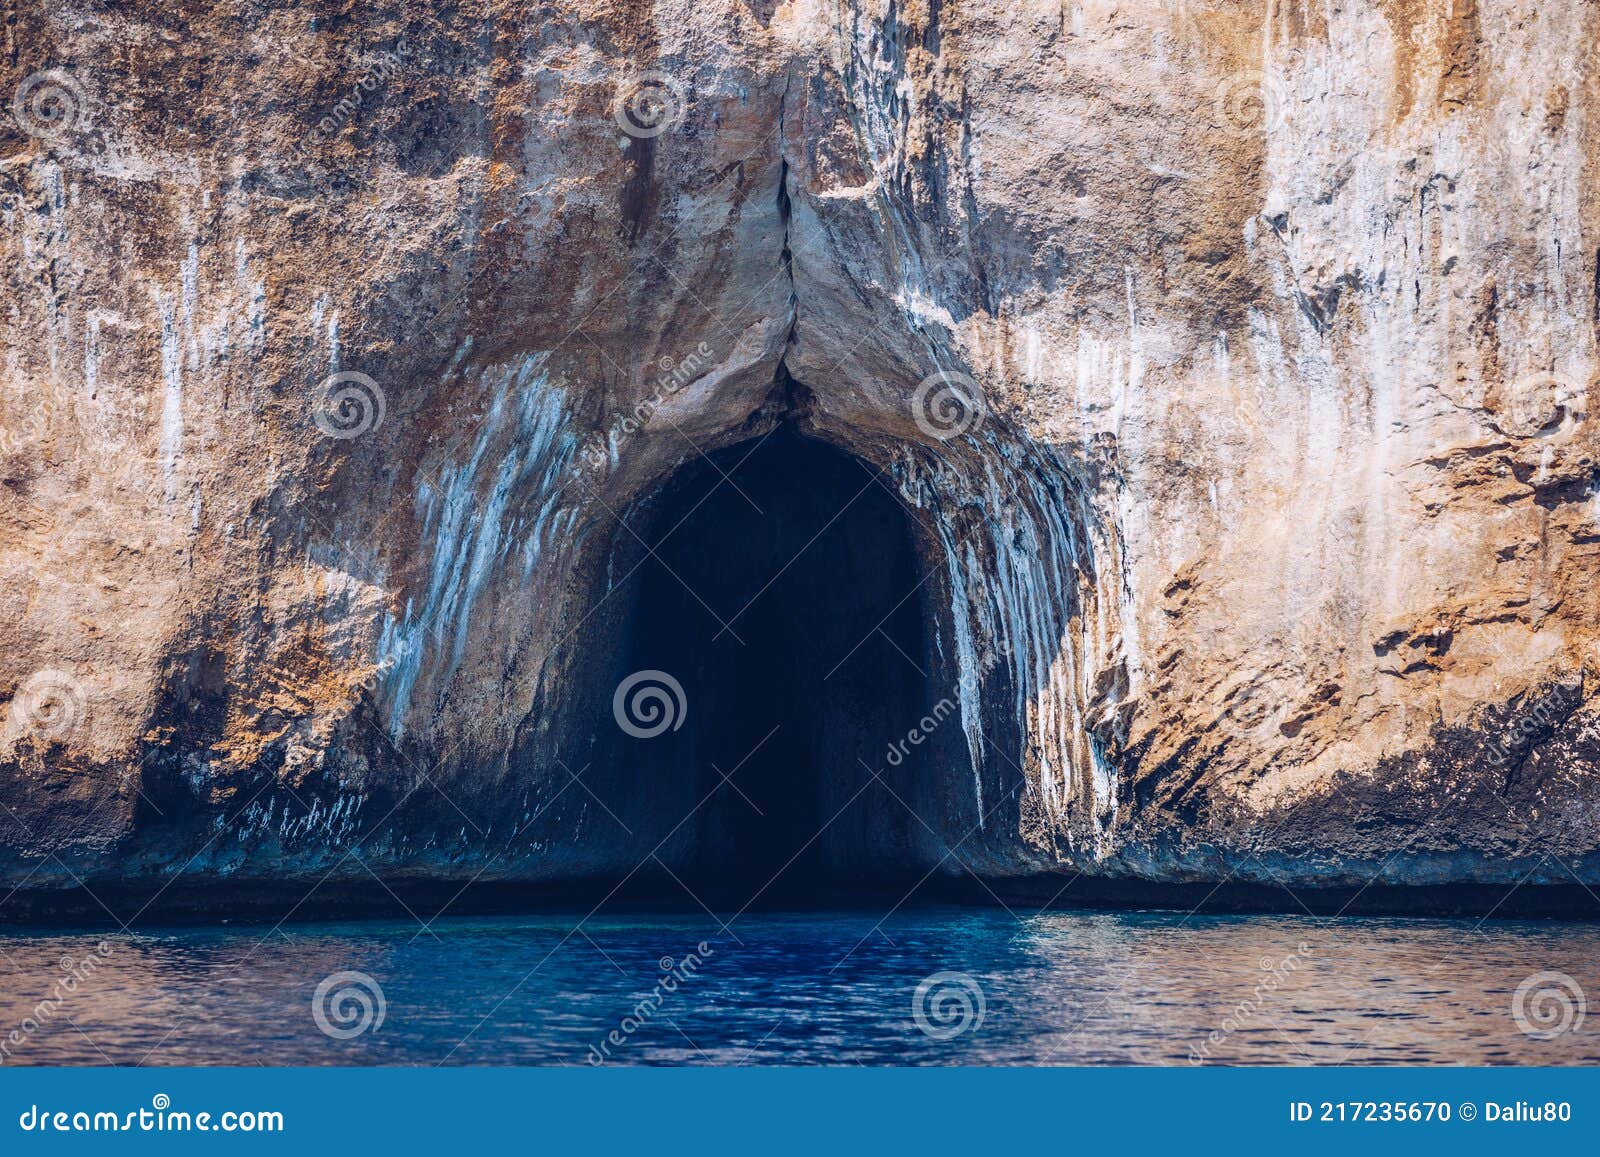 Blue Sea And The Characteristic Caves Of Cala Luna A Beach In The